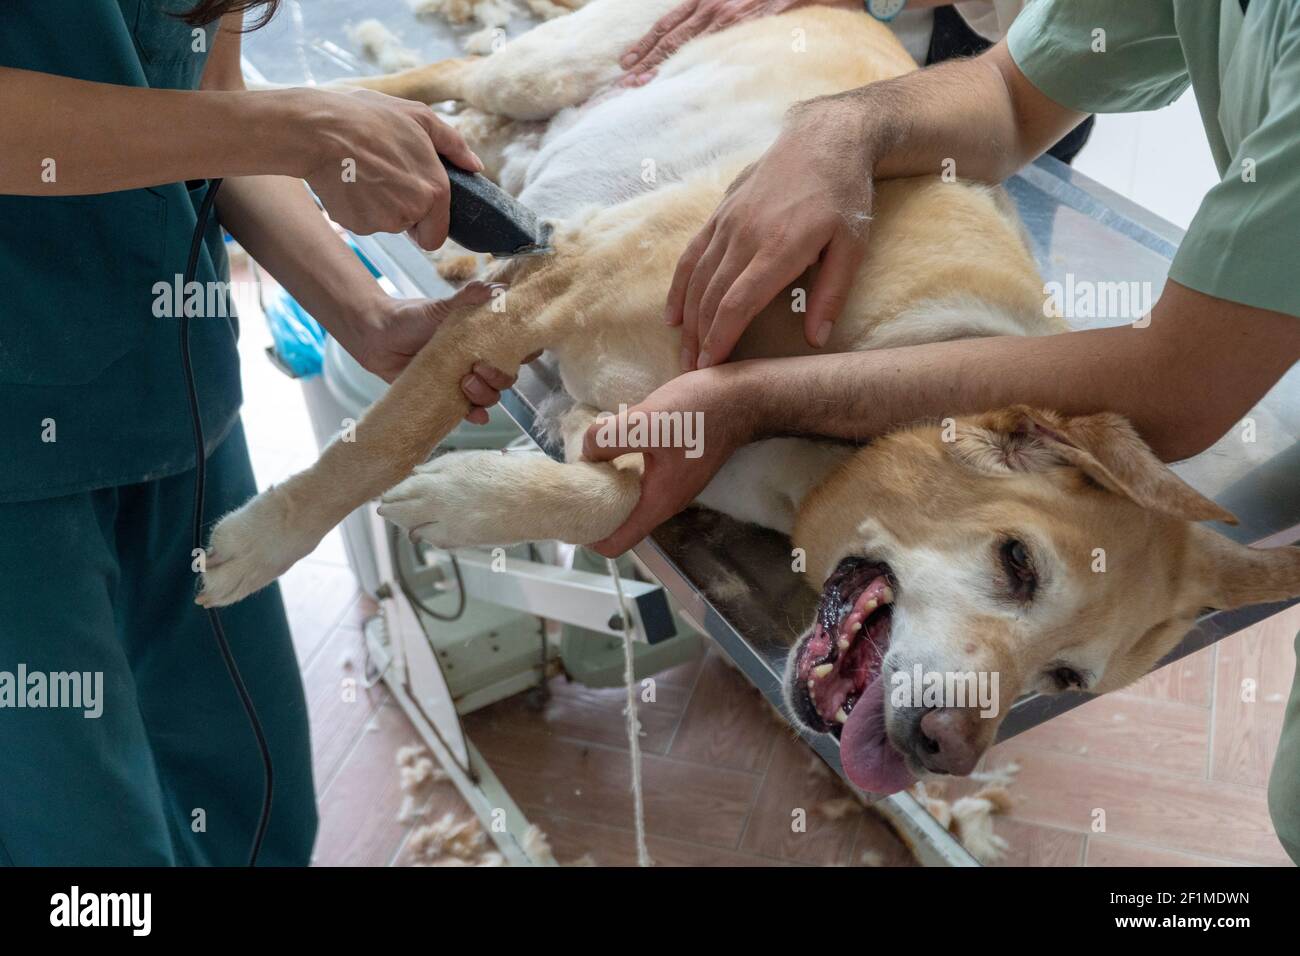 Animal spa and grooming concept: A Labrador red river is lying on a metal table and getting a hair cut. Human hands are holding his paws. Stock Photo